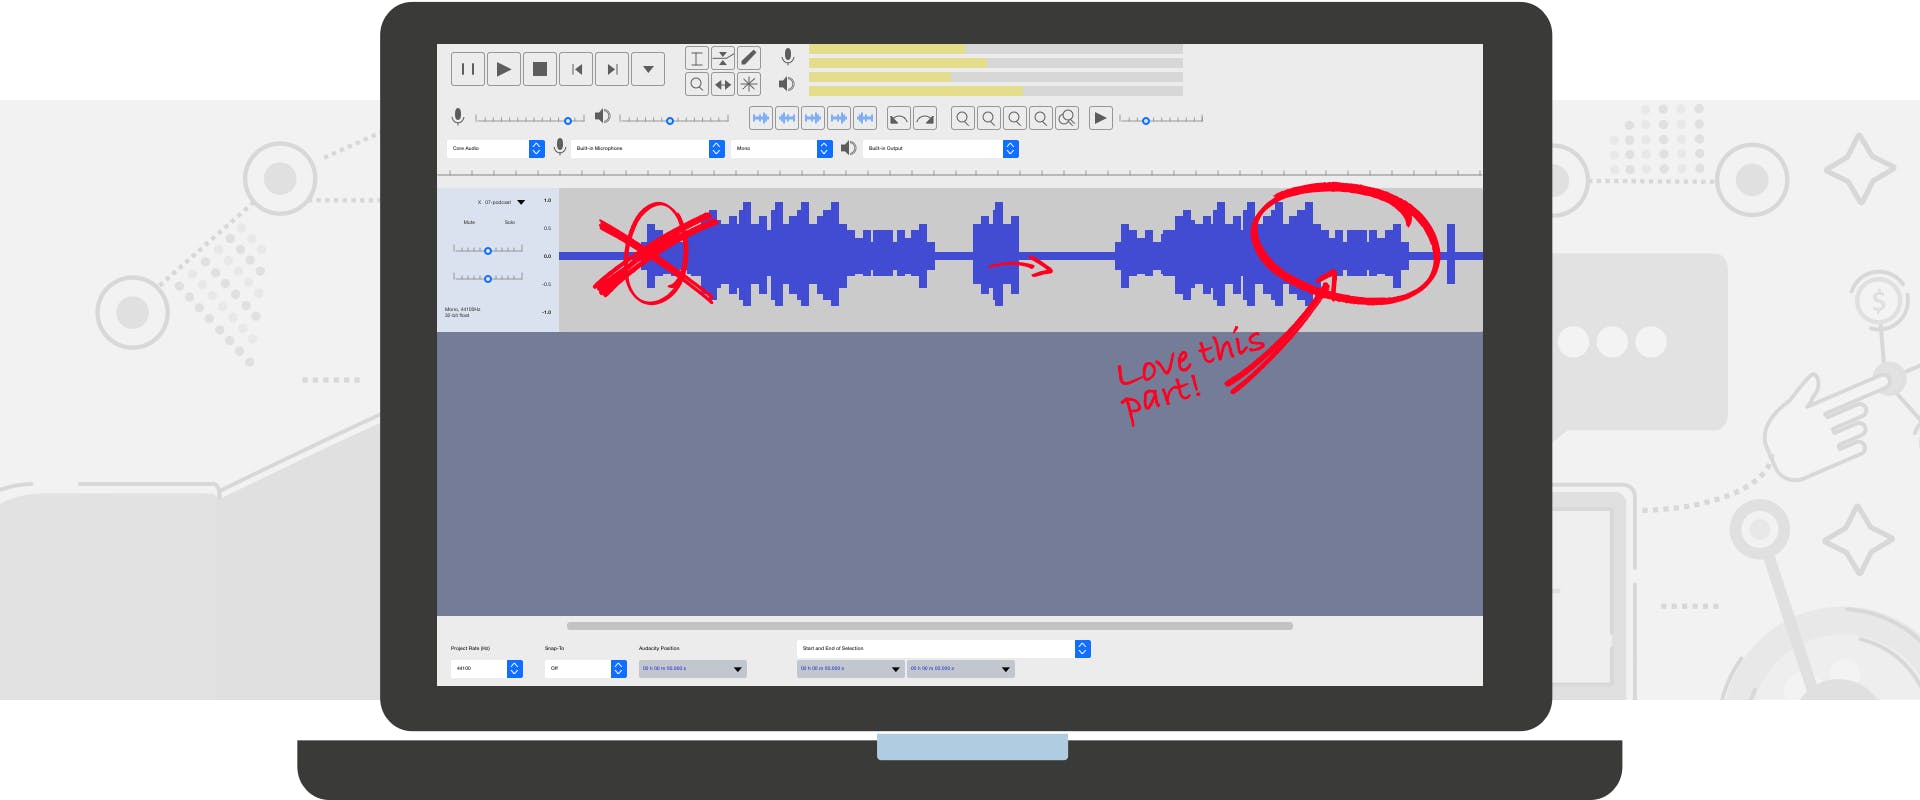 Laptop showing editing software and a waveform with red circles and arrows